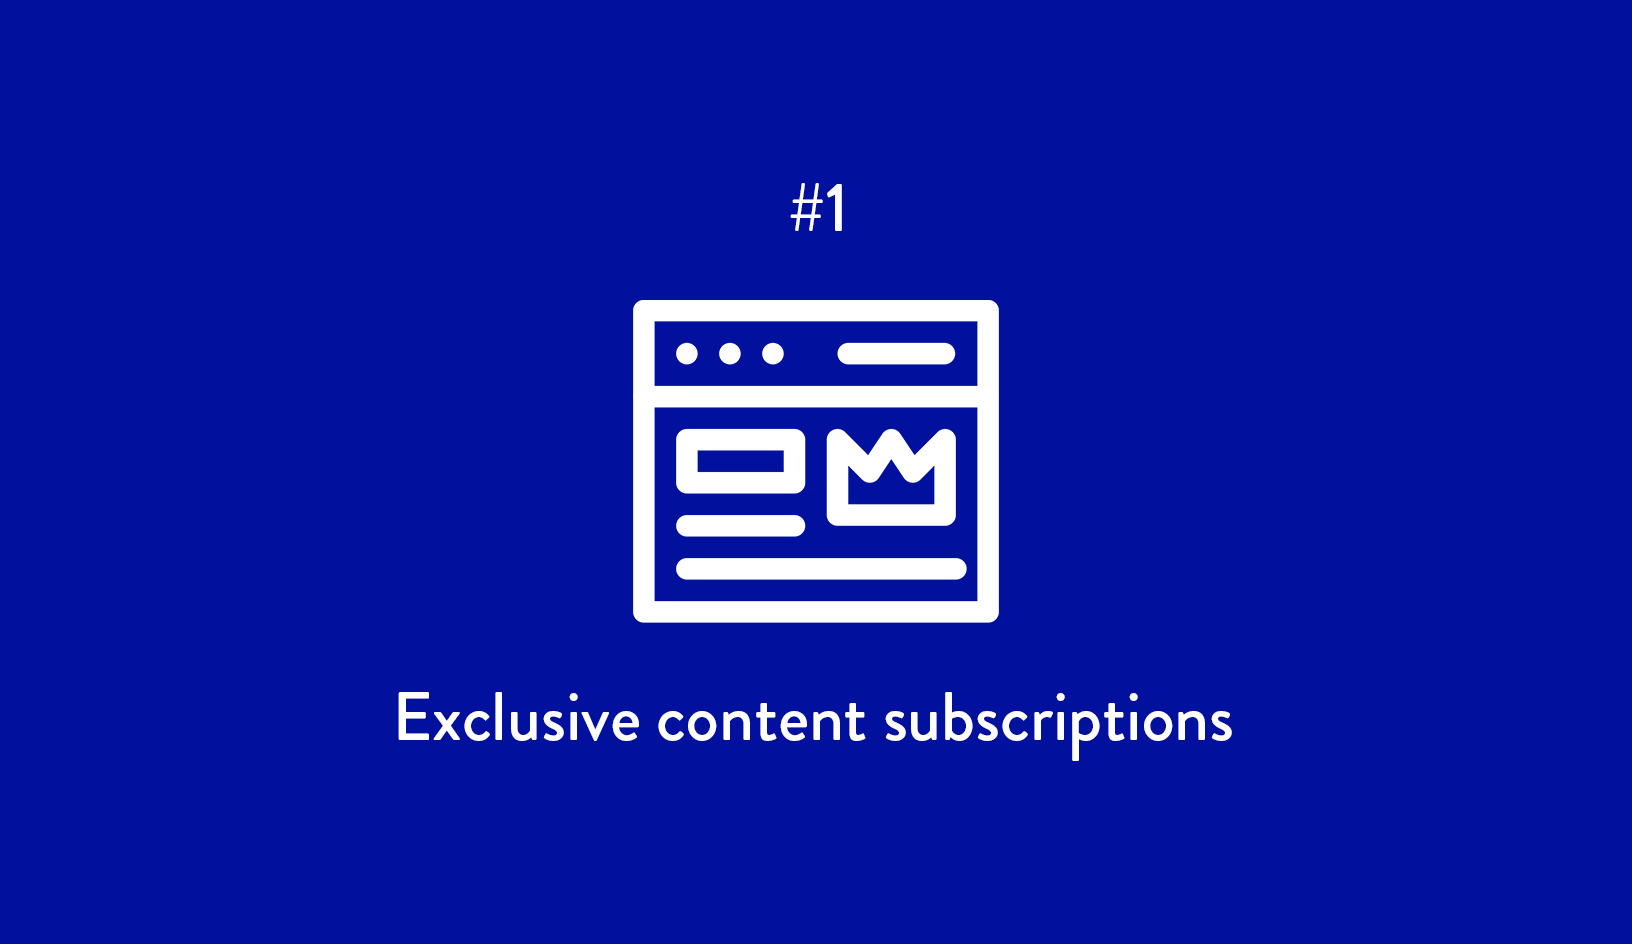 In order to gather leads at tradeshow, while respecting privacy laws, think about giving access to exclusive content subscriptions in order to gather emails and leads.